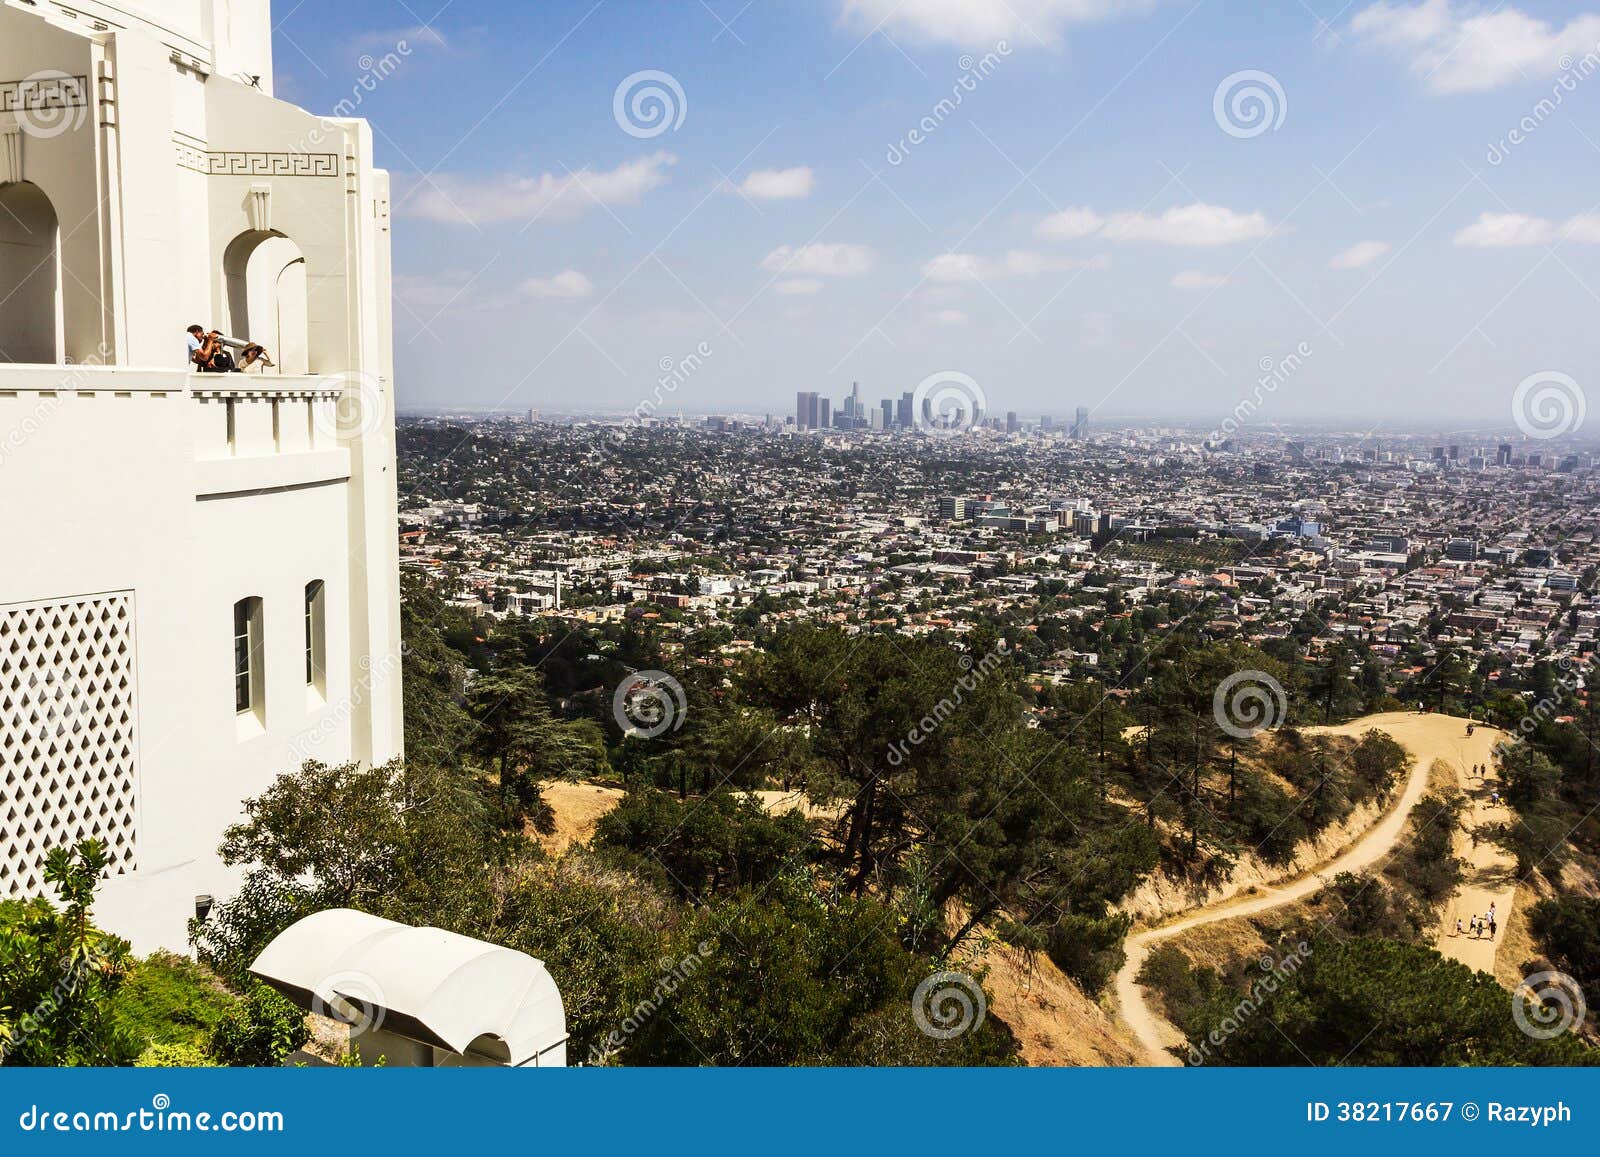 View of Los Angeles. Los Angeles, CA, USA - may 2013: Los Angeles seen from Griffith Observatory